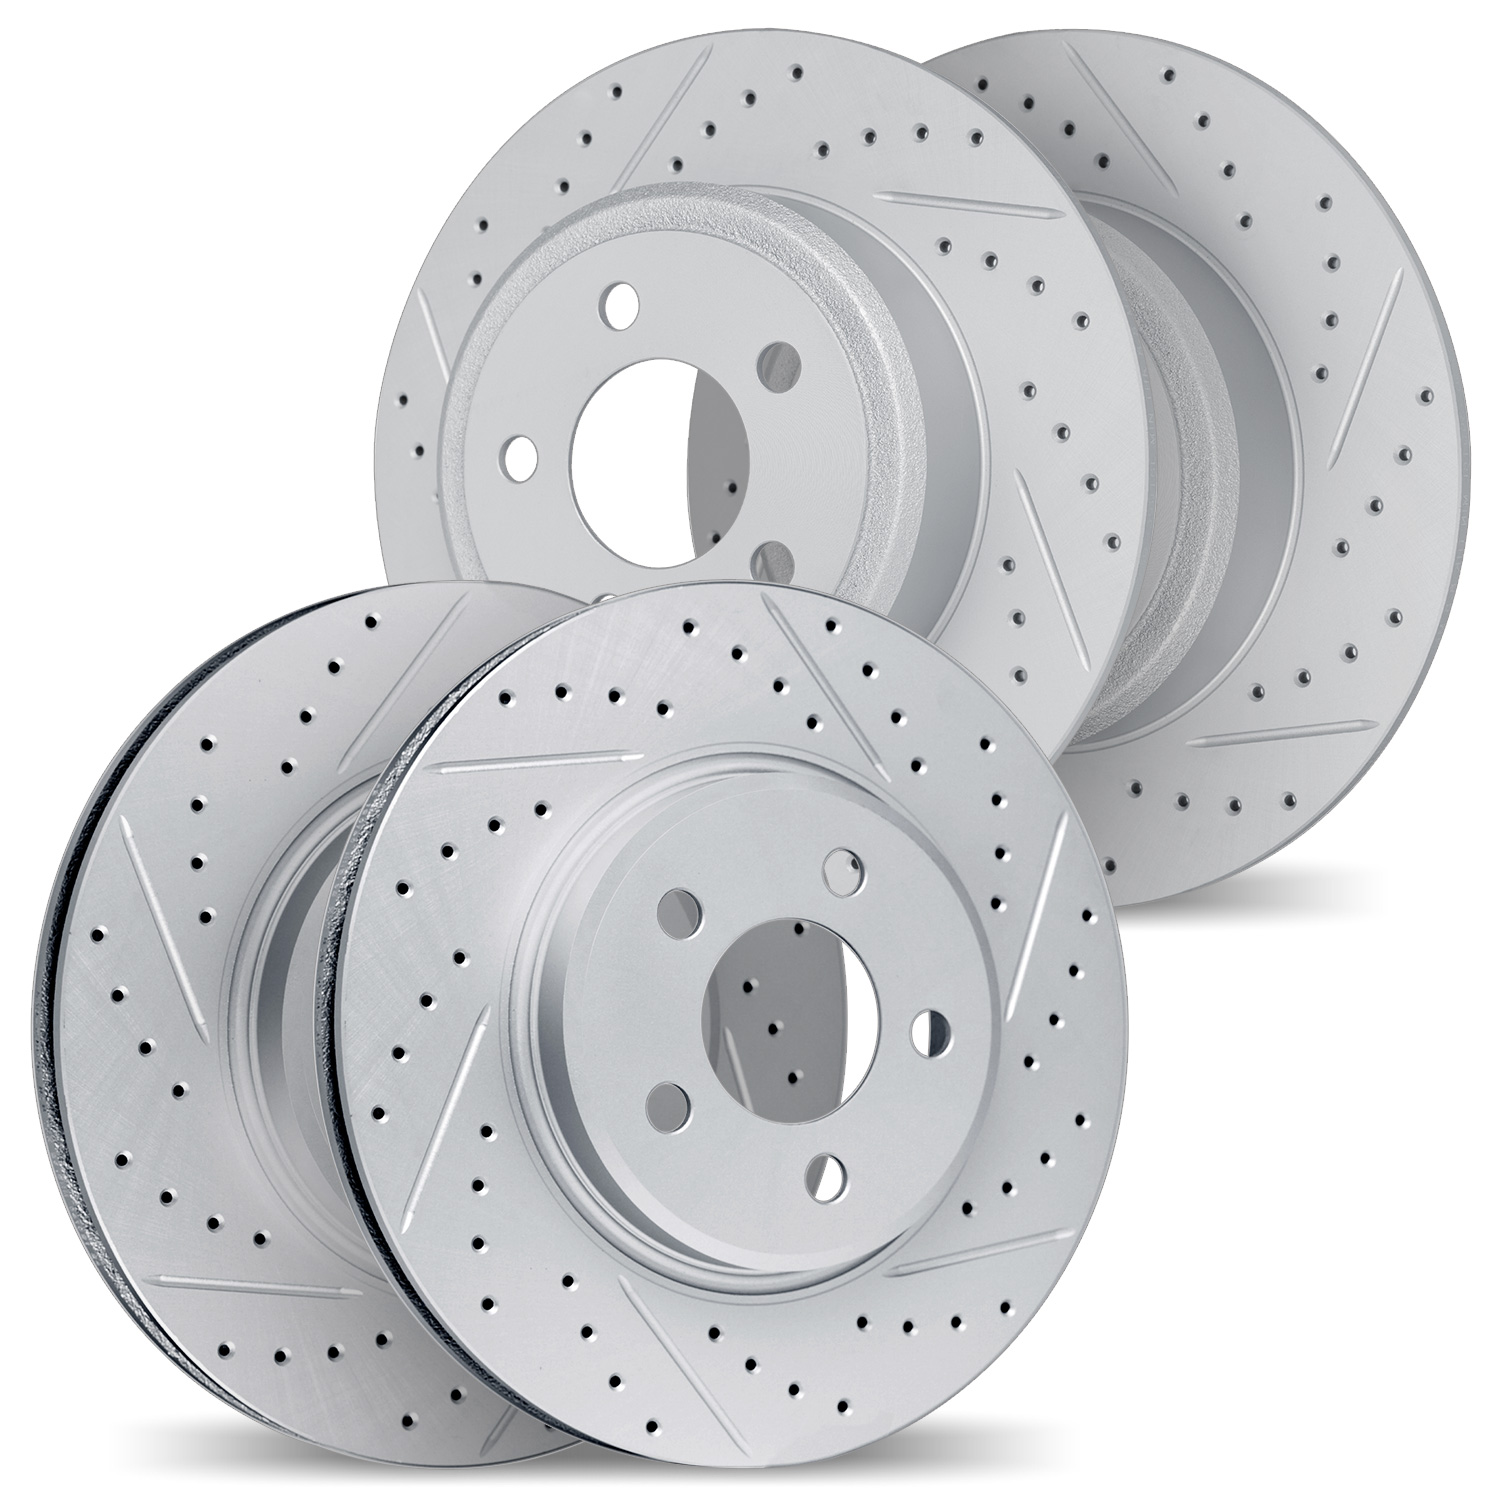 2004-11000 Geoperformance Drilled/Slotted Brake Rotors, 2015-2019 Multiple Makes/Models, Position: Front and Rear